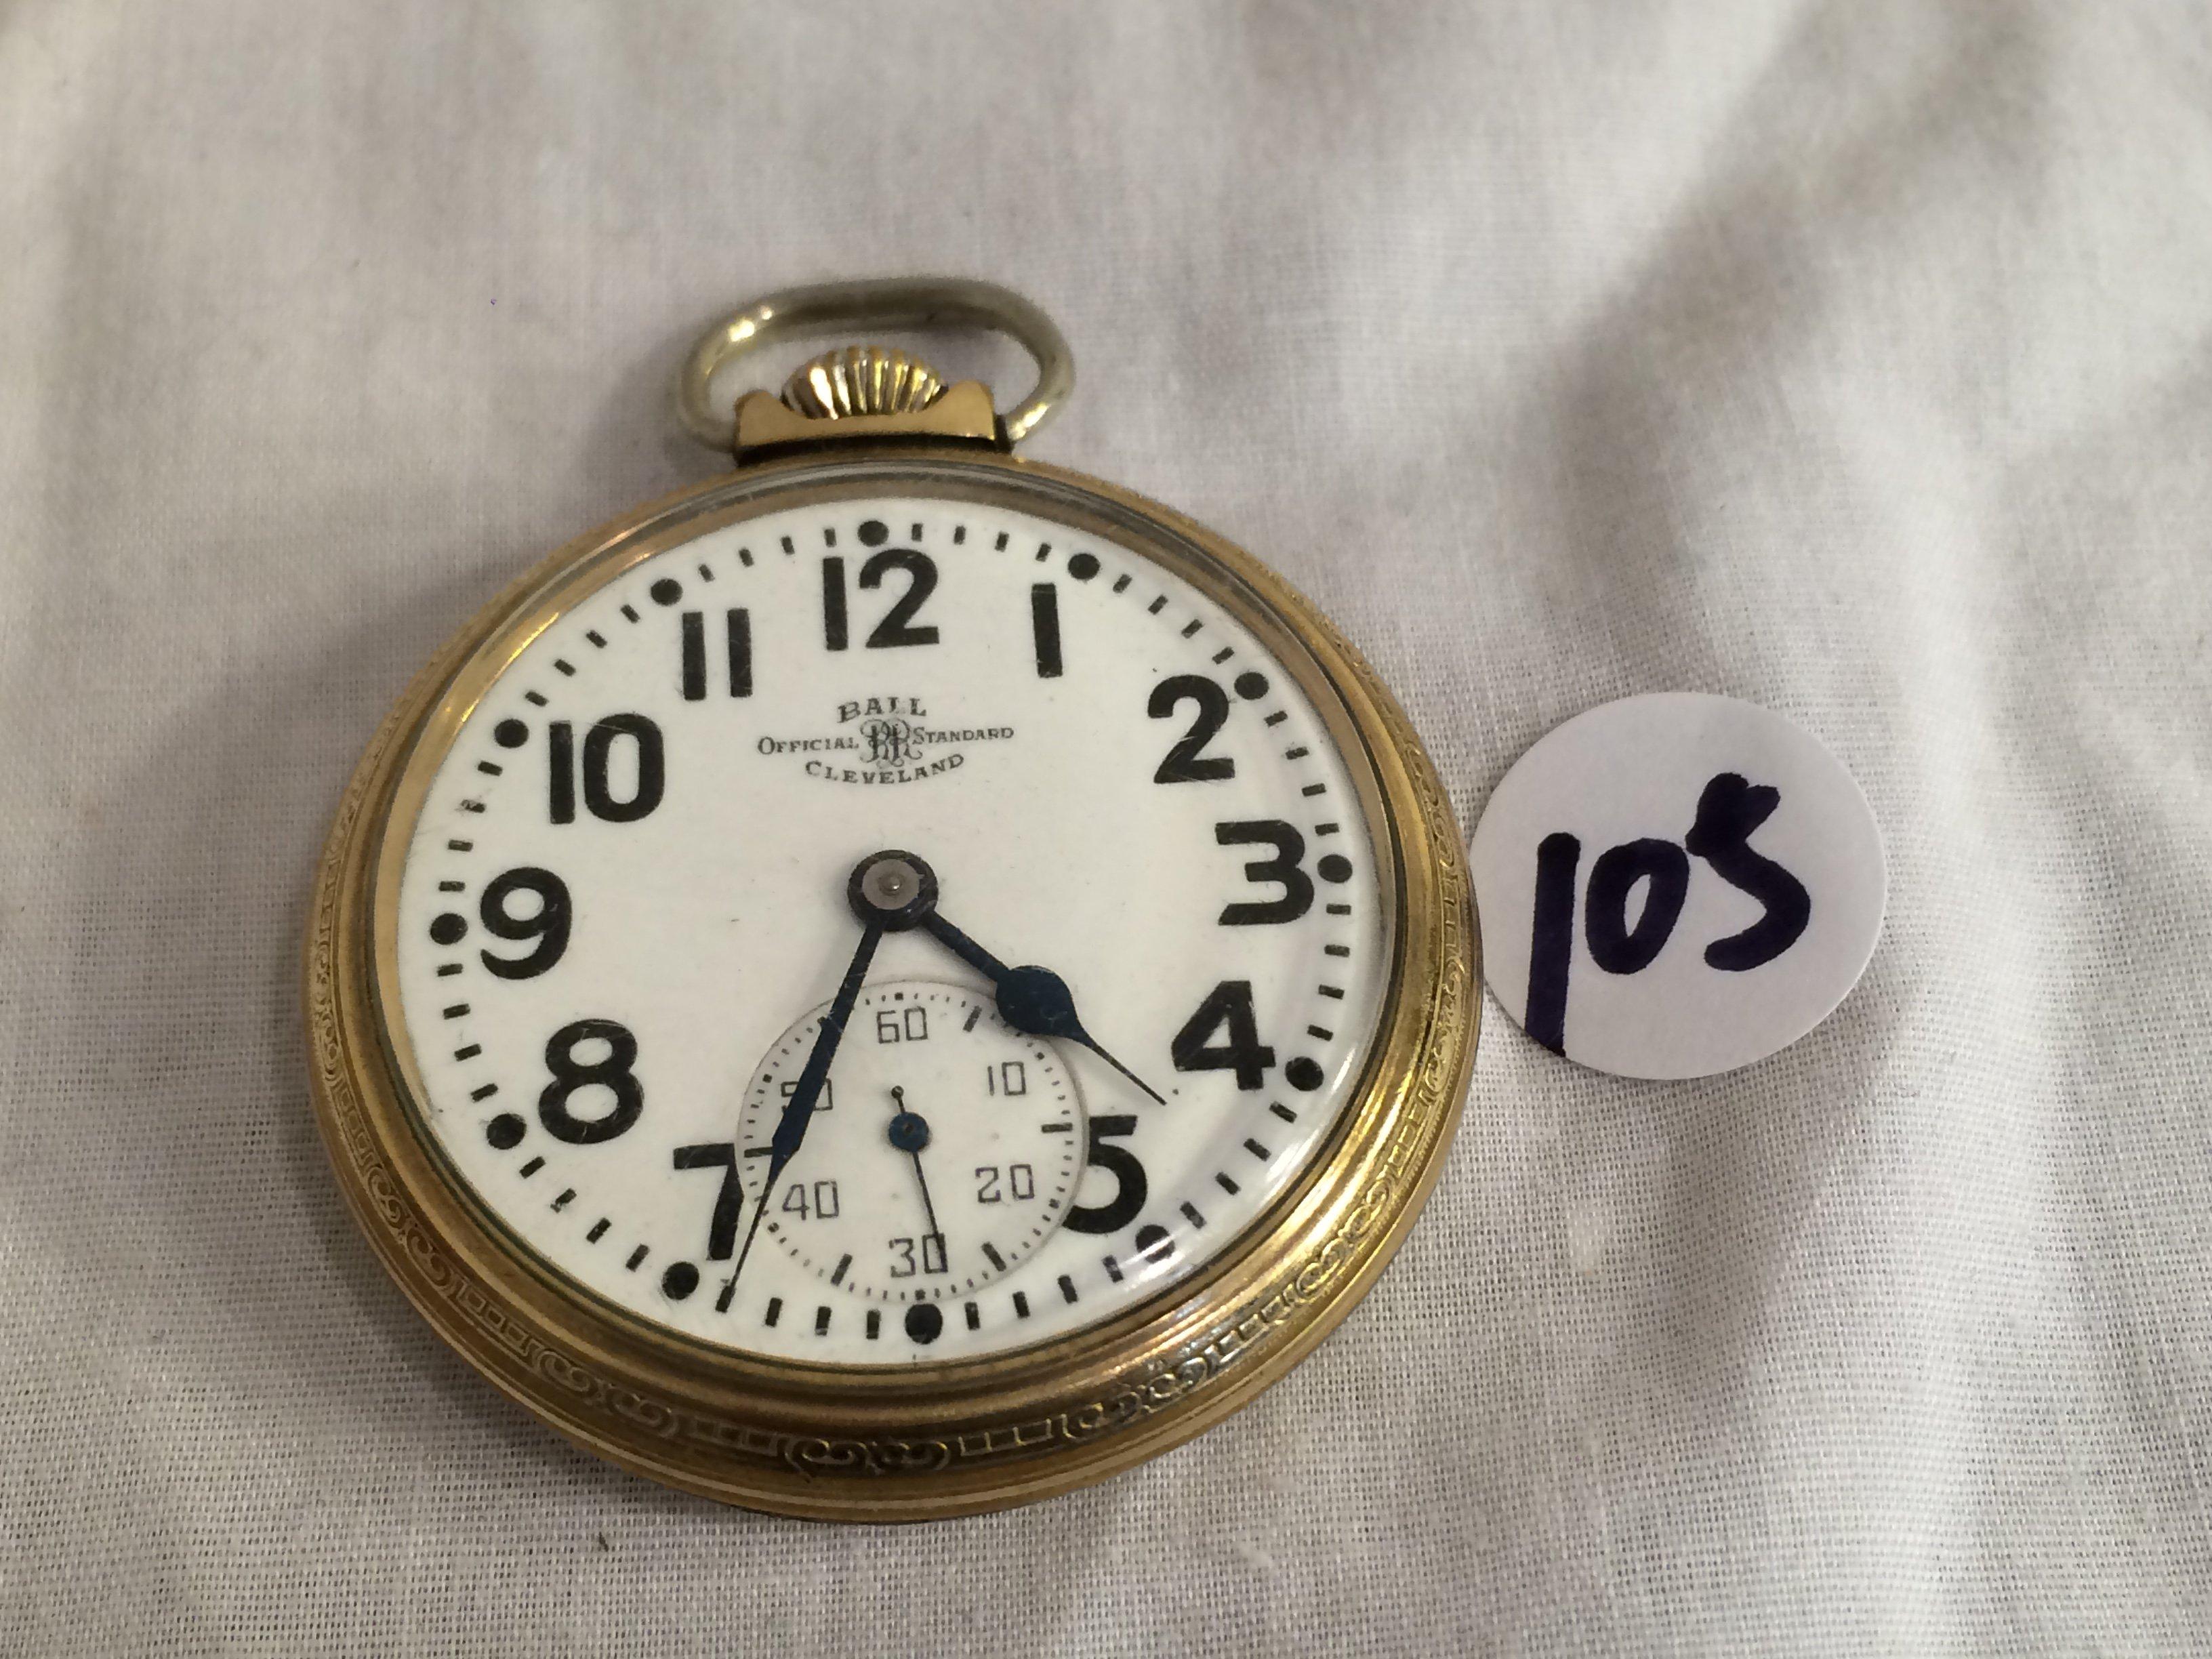 Collector Ball Official Standard Cleveland Pocketwatch -see Pictures